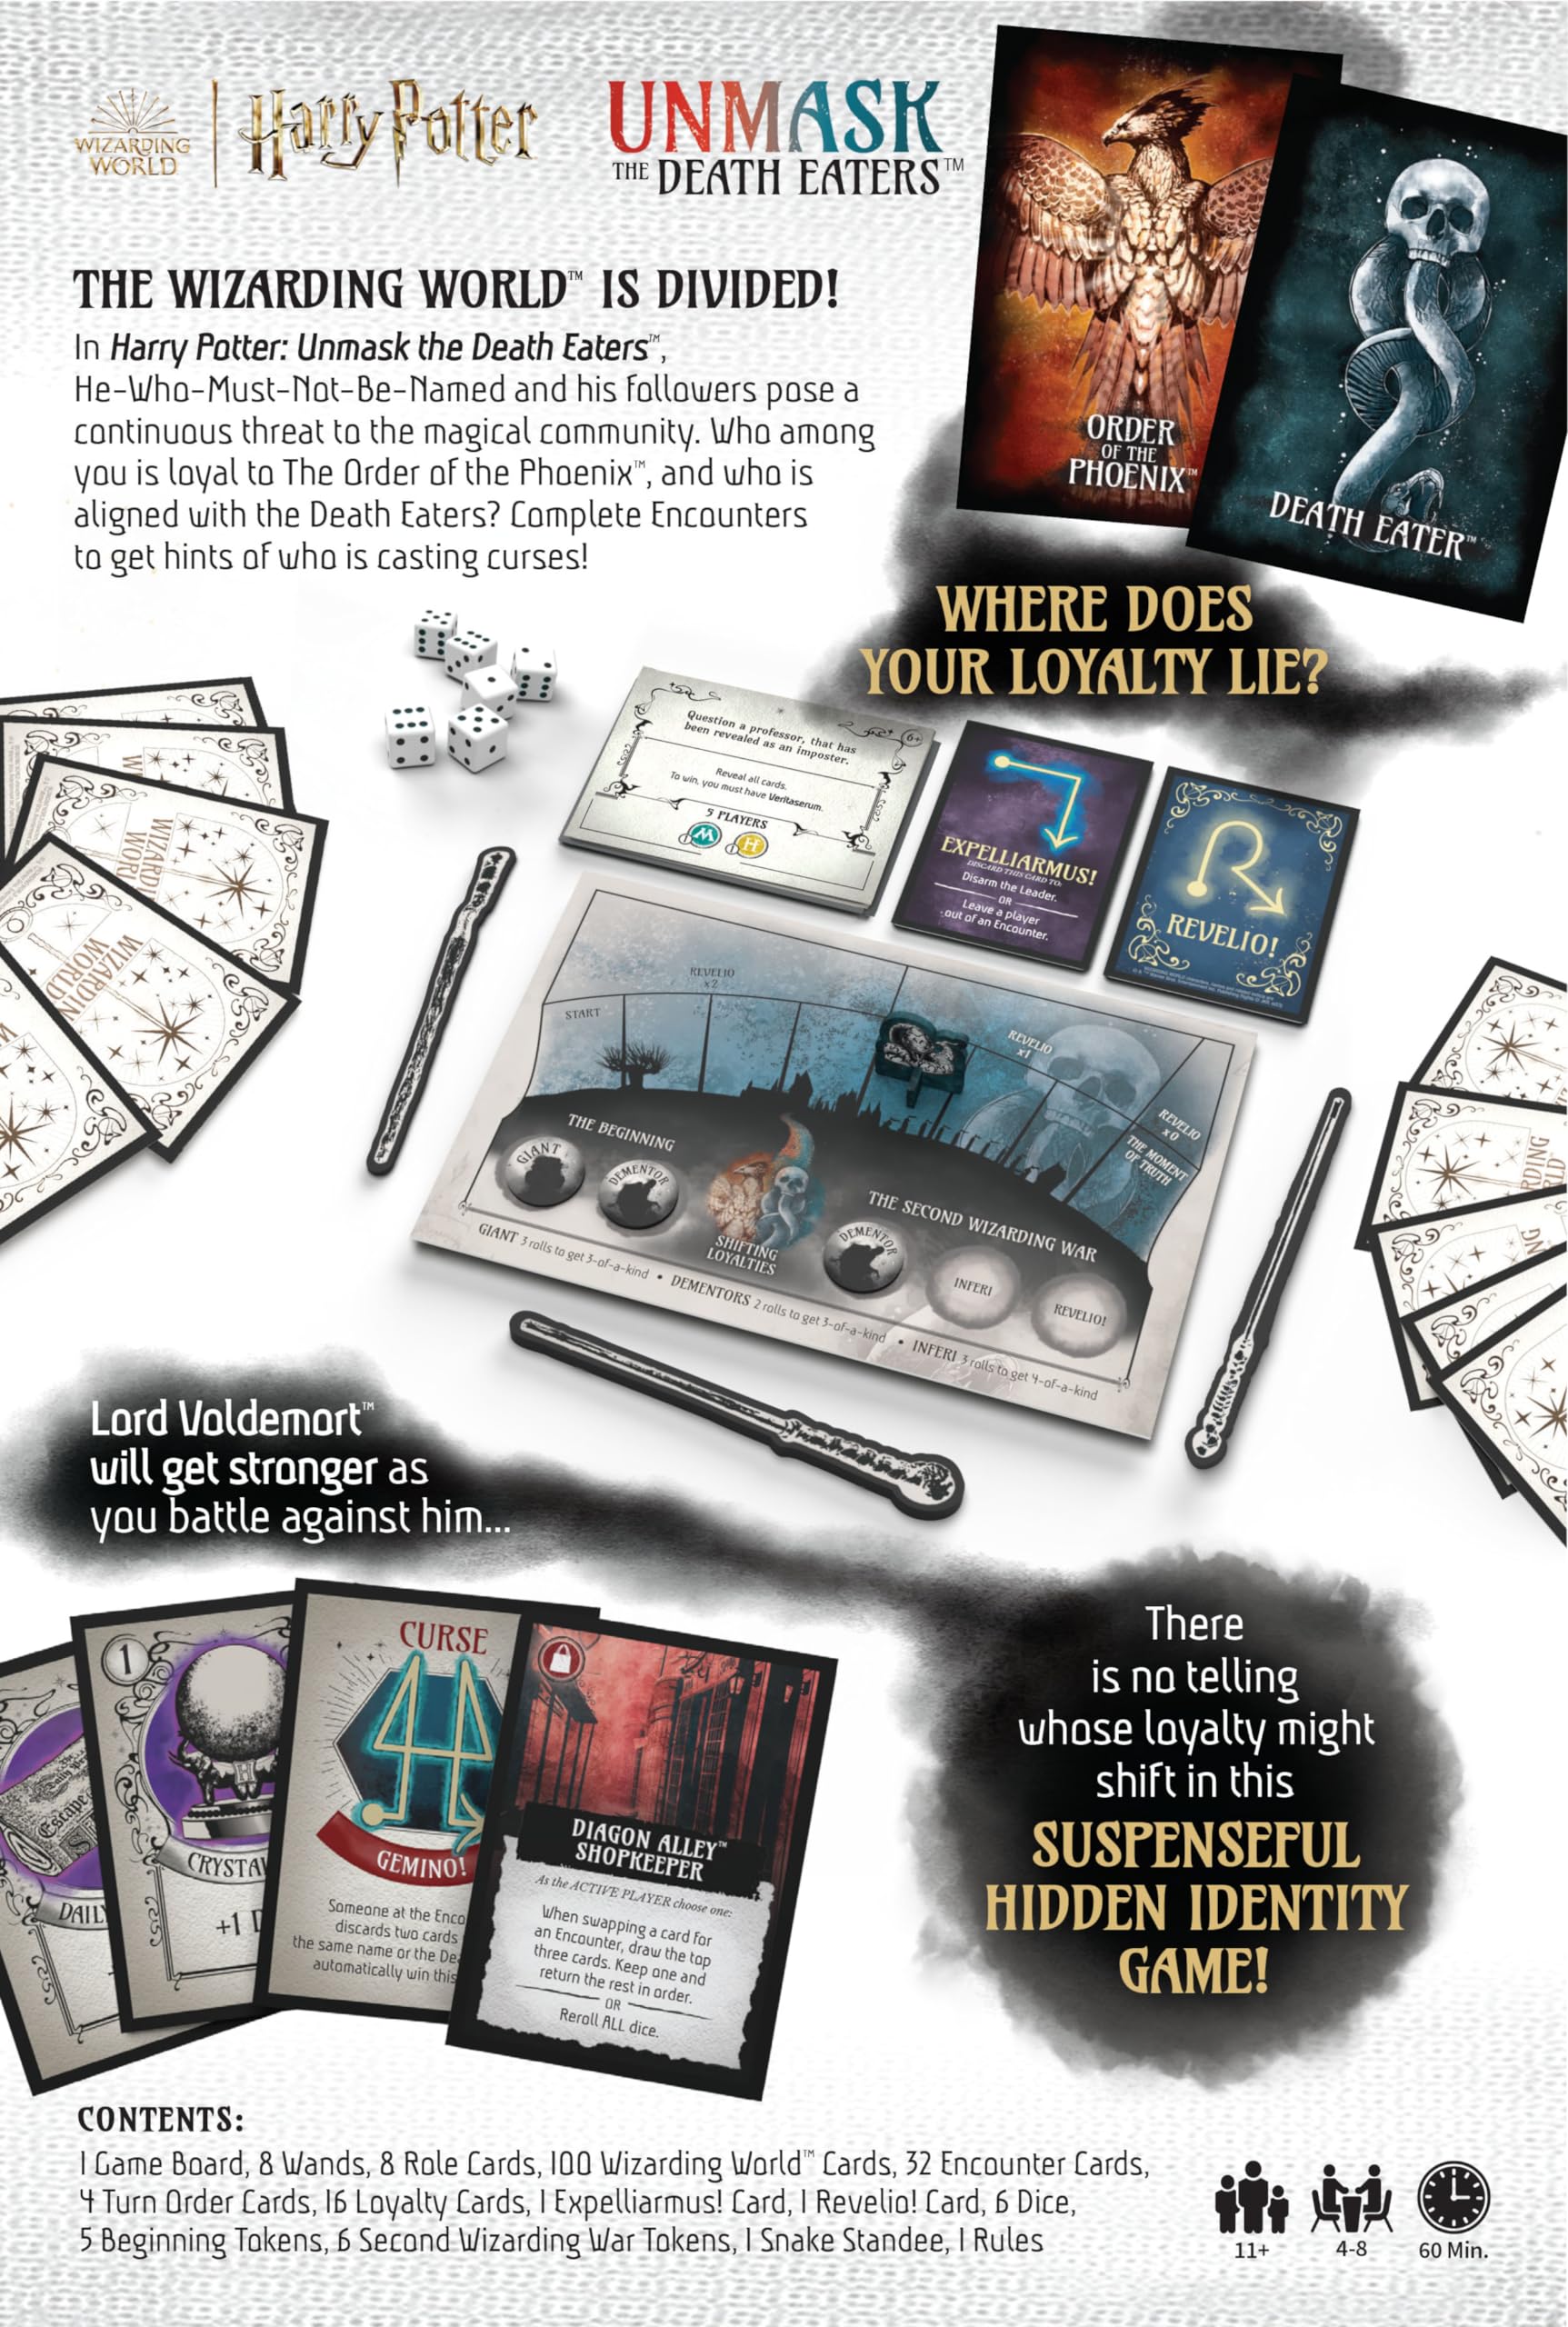 Harry Potter: Unmask The Death Eaters Board Game | Engaging Social Deduction Game Set in The Wizarding World of Harry Potter | Hidden Roles & Bluffing Game | Ages 11 and up, 4-8 Players